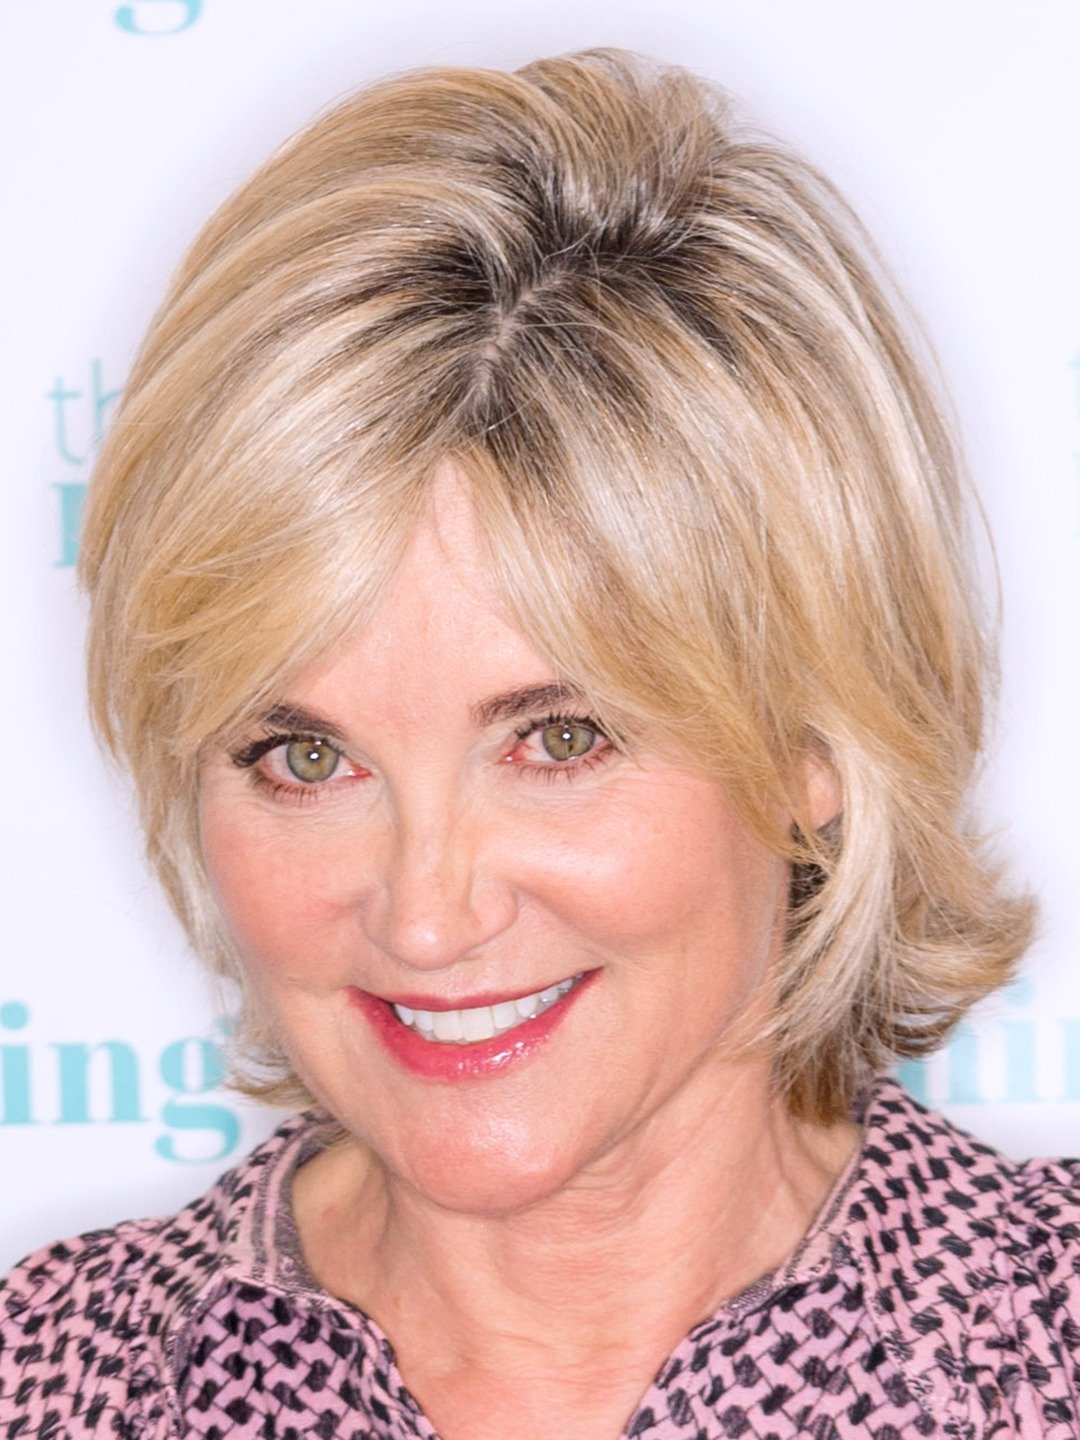 How tall is Anthea Turner?